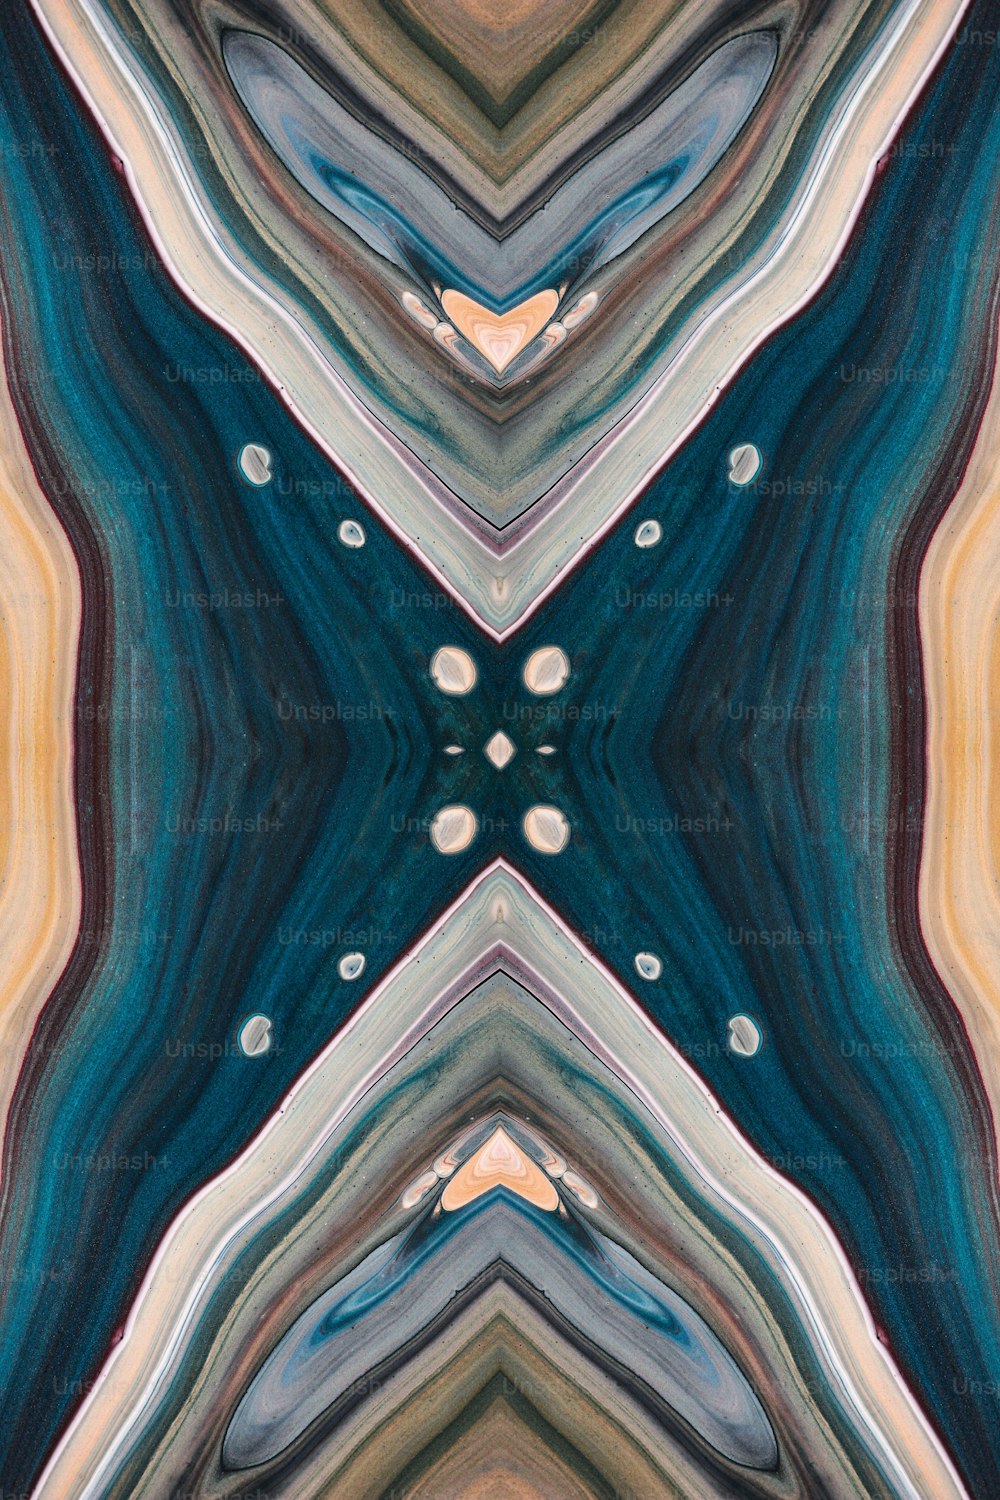 an image of an abstract pattern made up of different colors